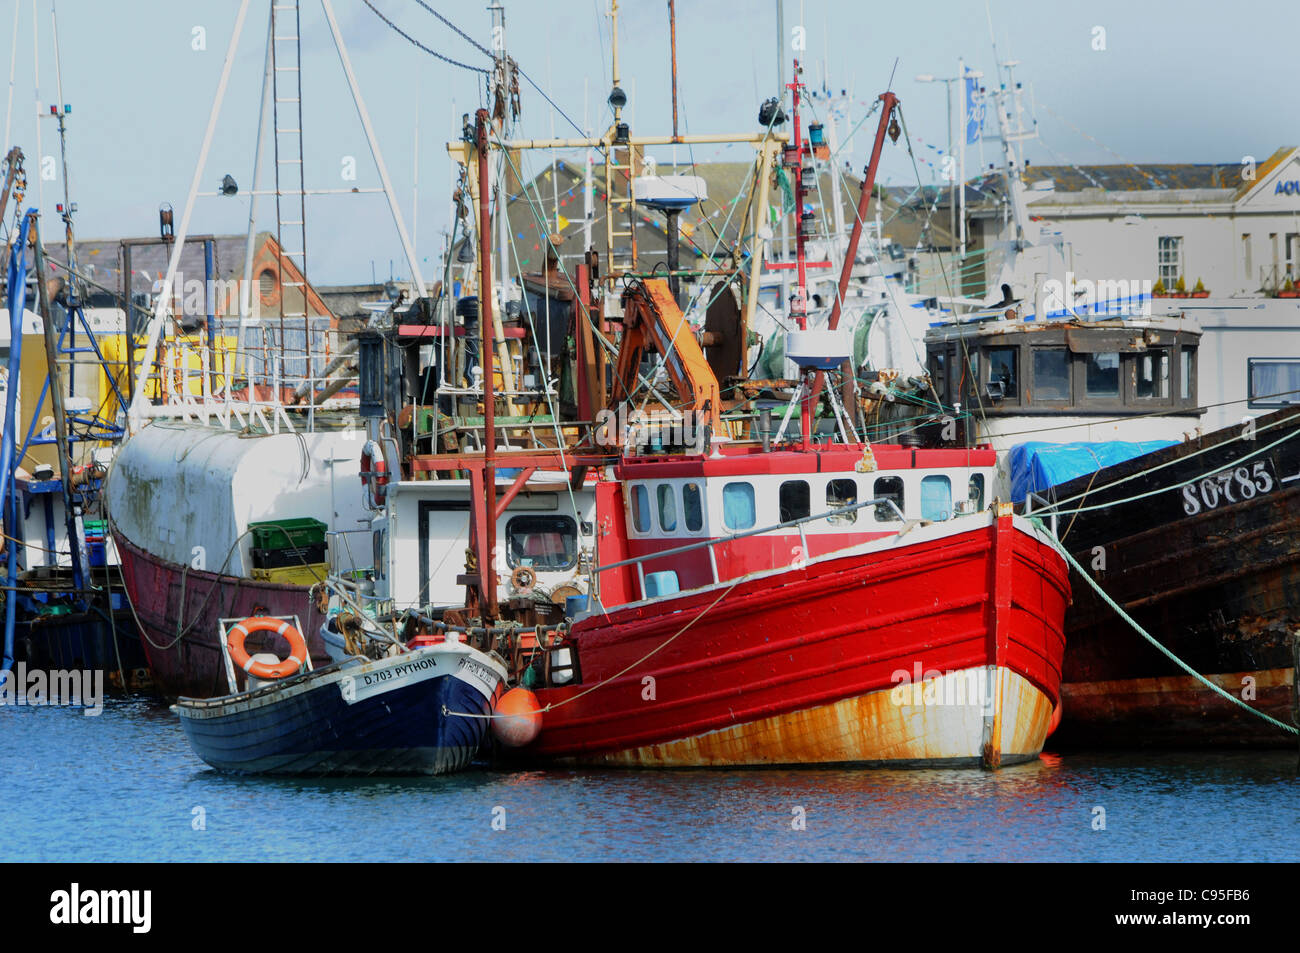 FISHING BOATS AT THE QUAYSIDE IN THE HARBOUR AT LOWTH, SOUTHERN IRELAND Stock Photo